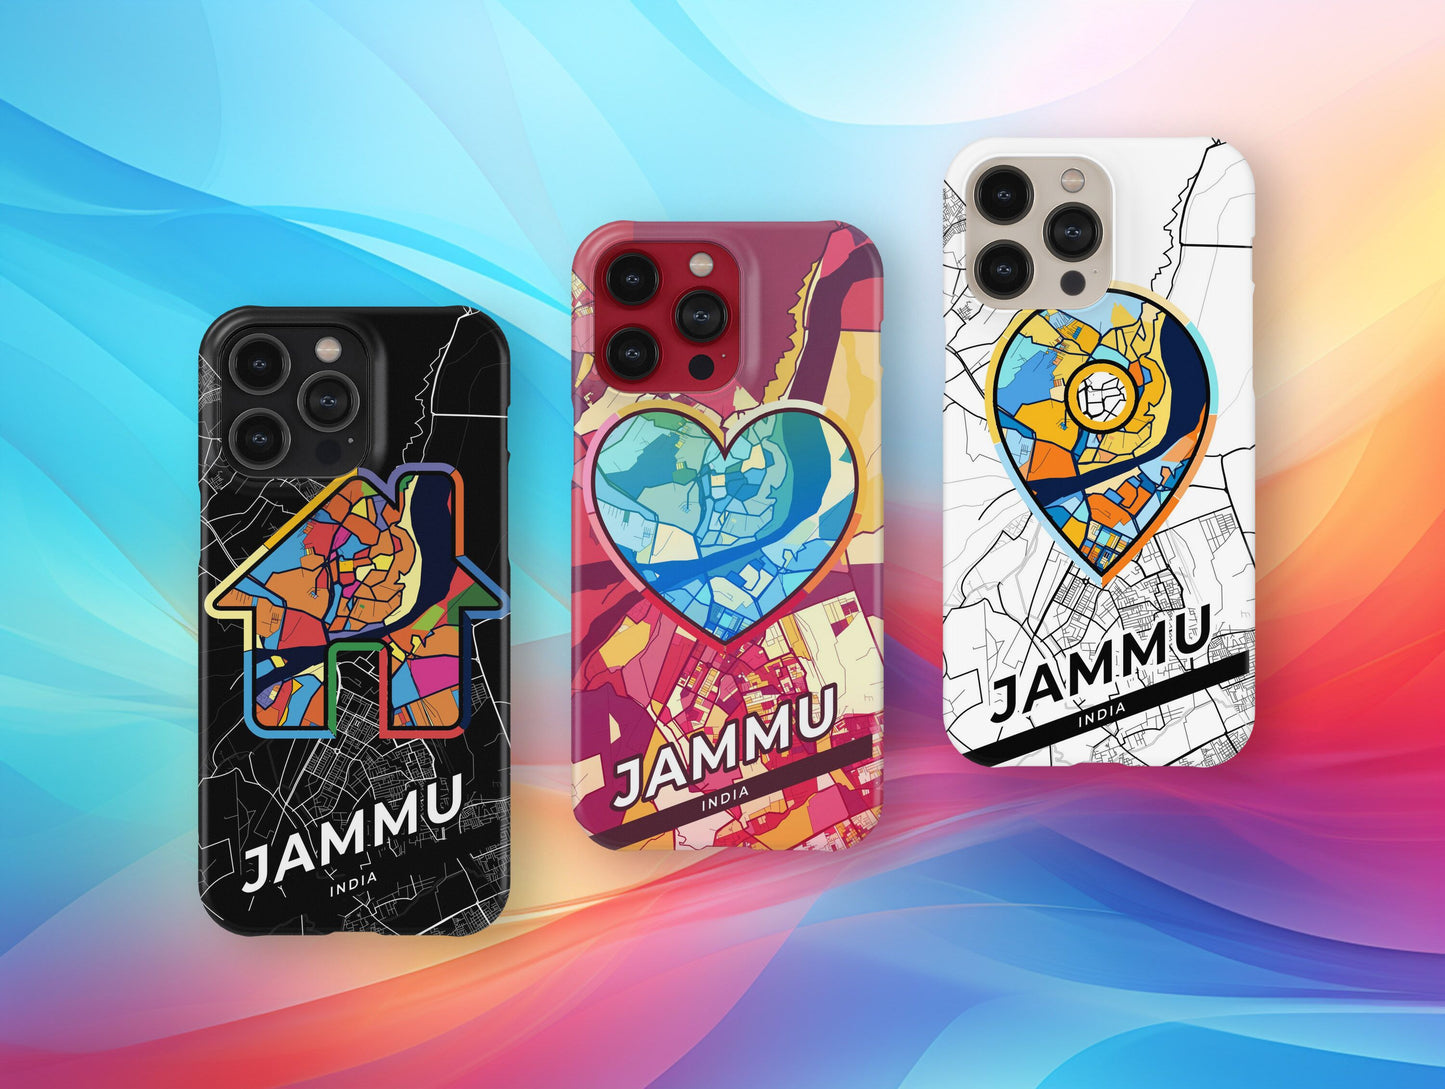 Jammu India slim phone case with colorful icon. Birthday, wedding or housewarming gift. Couple match cases.